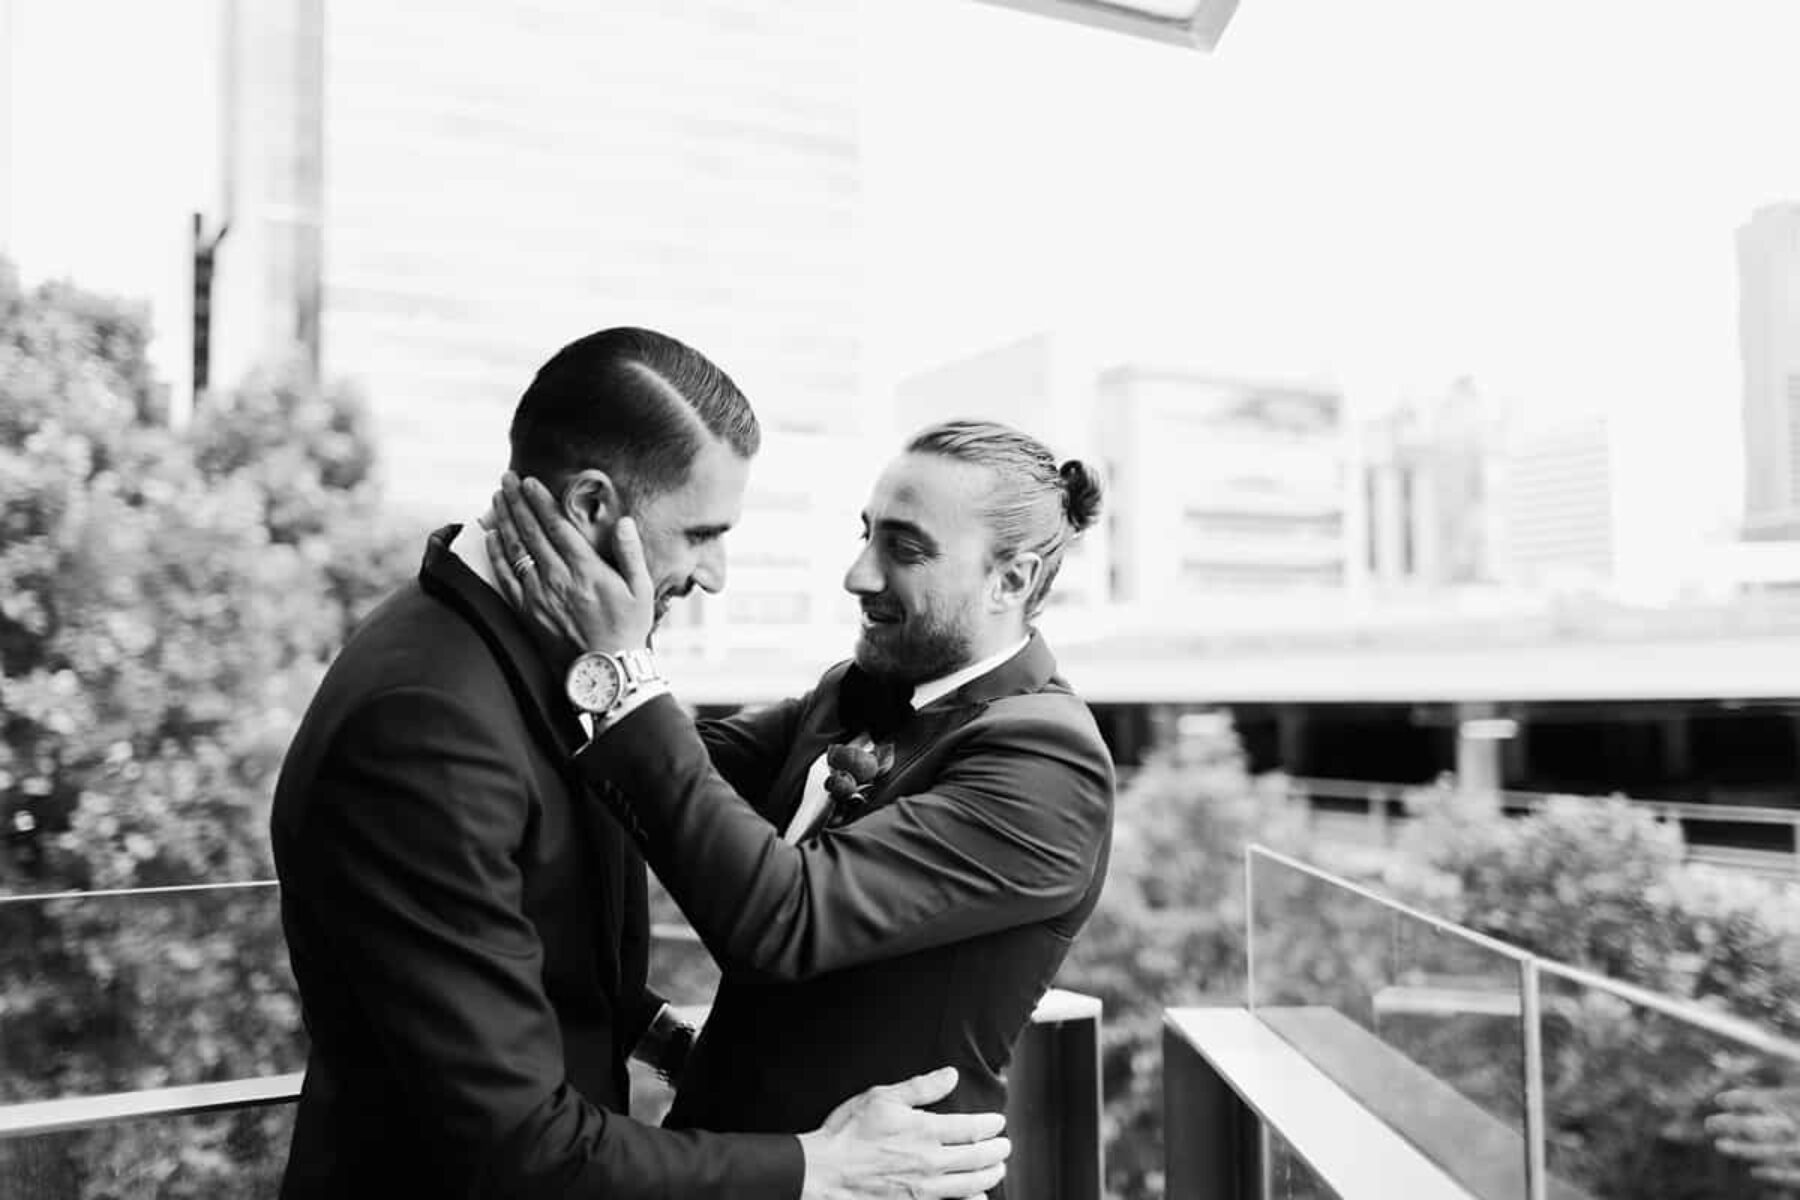 Melbourne rooftop wedding at Siglo - photography by Sayher Heffernan